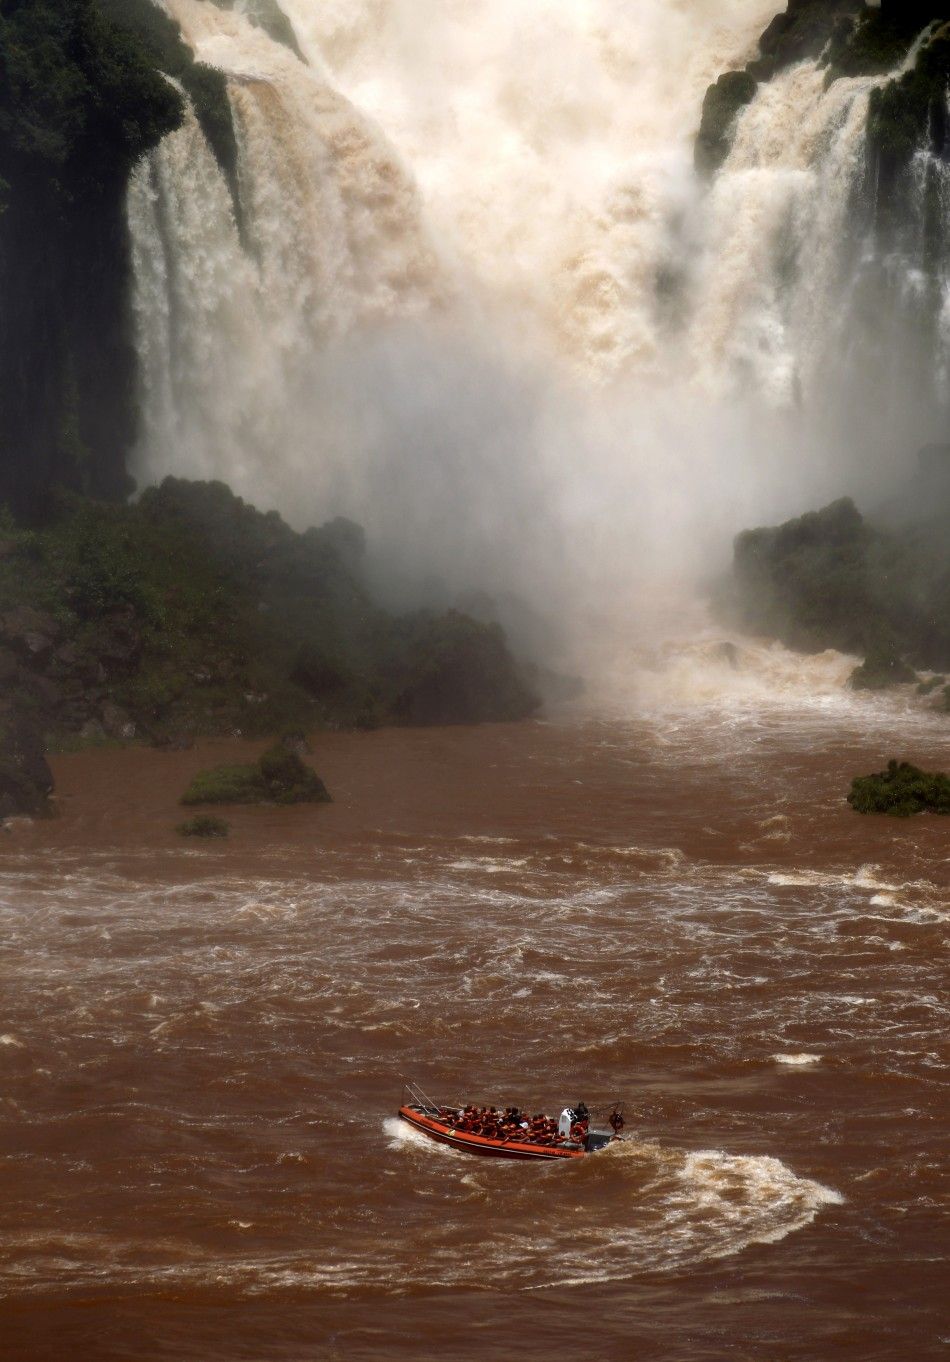 A boat carrying tourists sails by the Iguazu Falls on the border of Argentina039s province of Misiones and Brazil039s State of Parana.